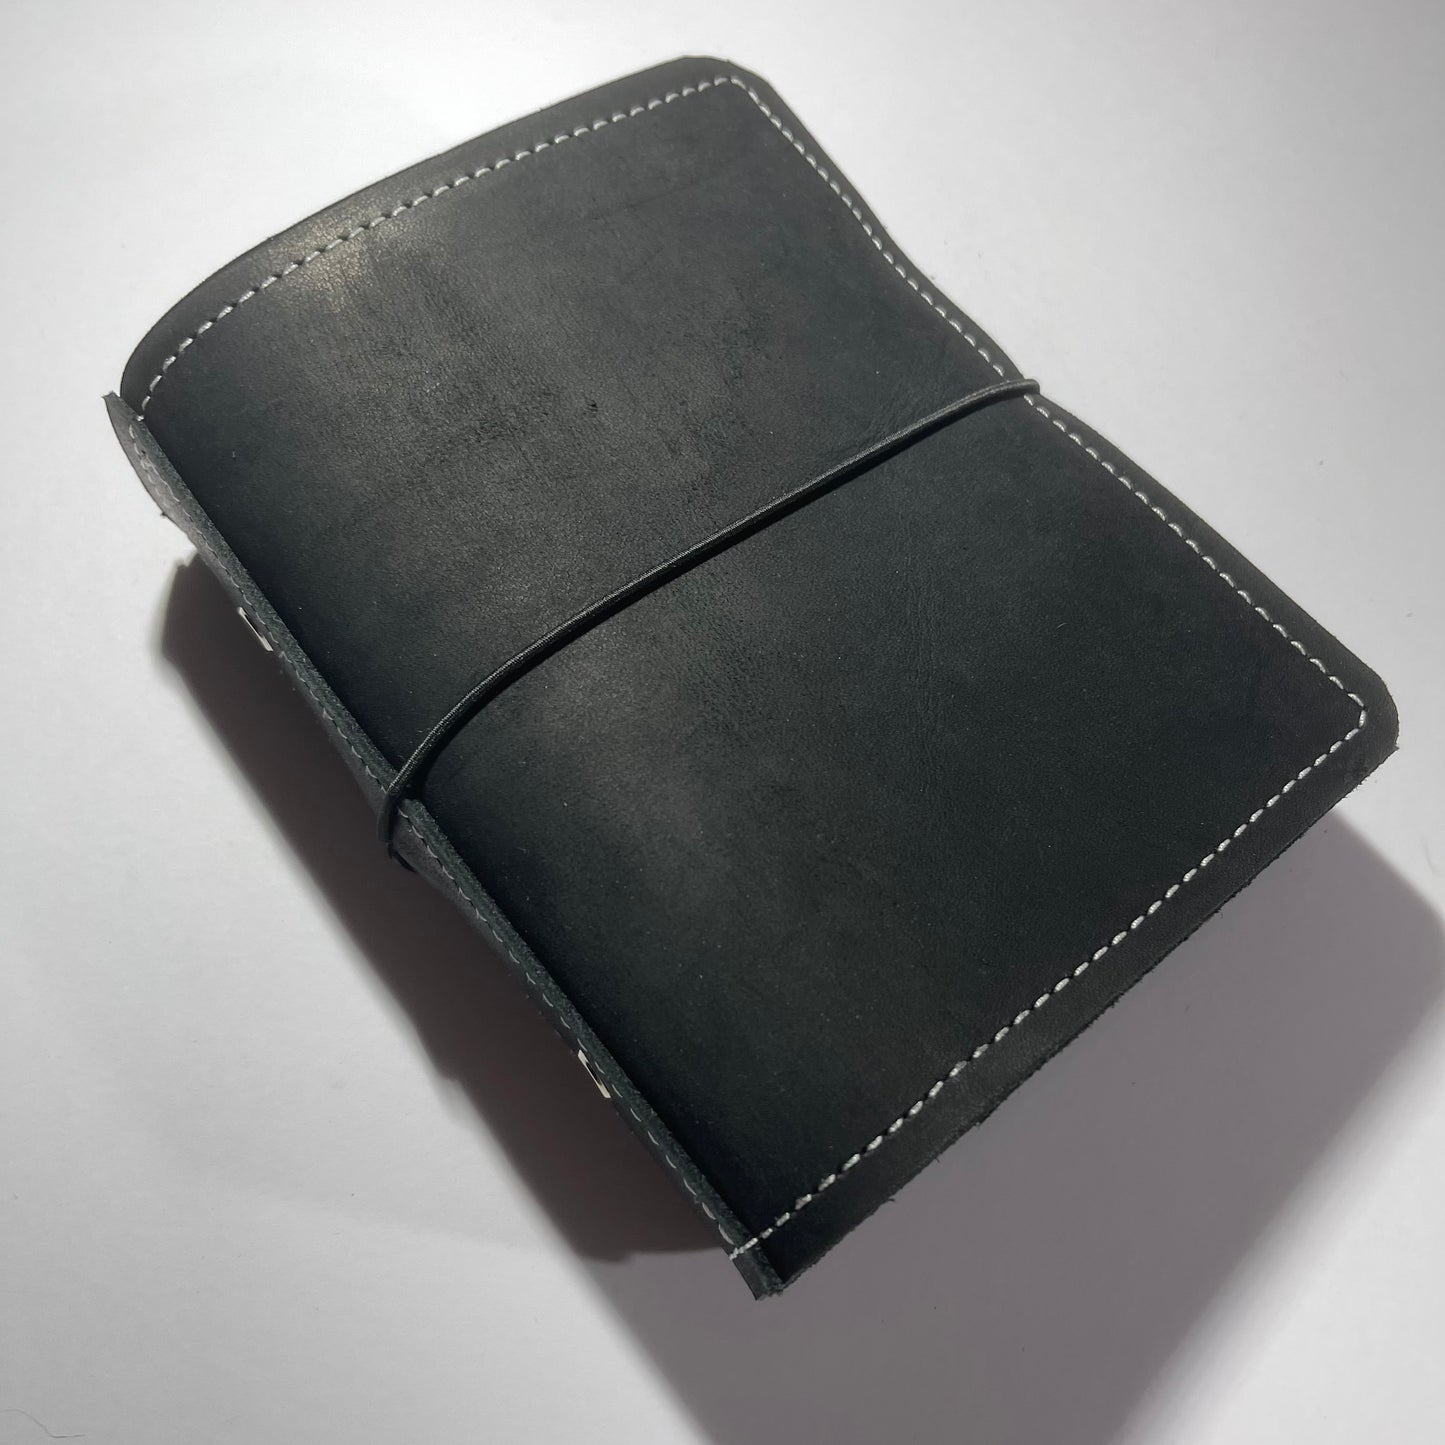 Distressed Black Leather Cover - READ LISTING